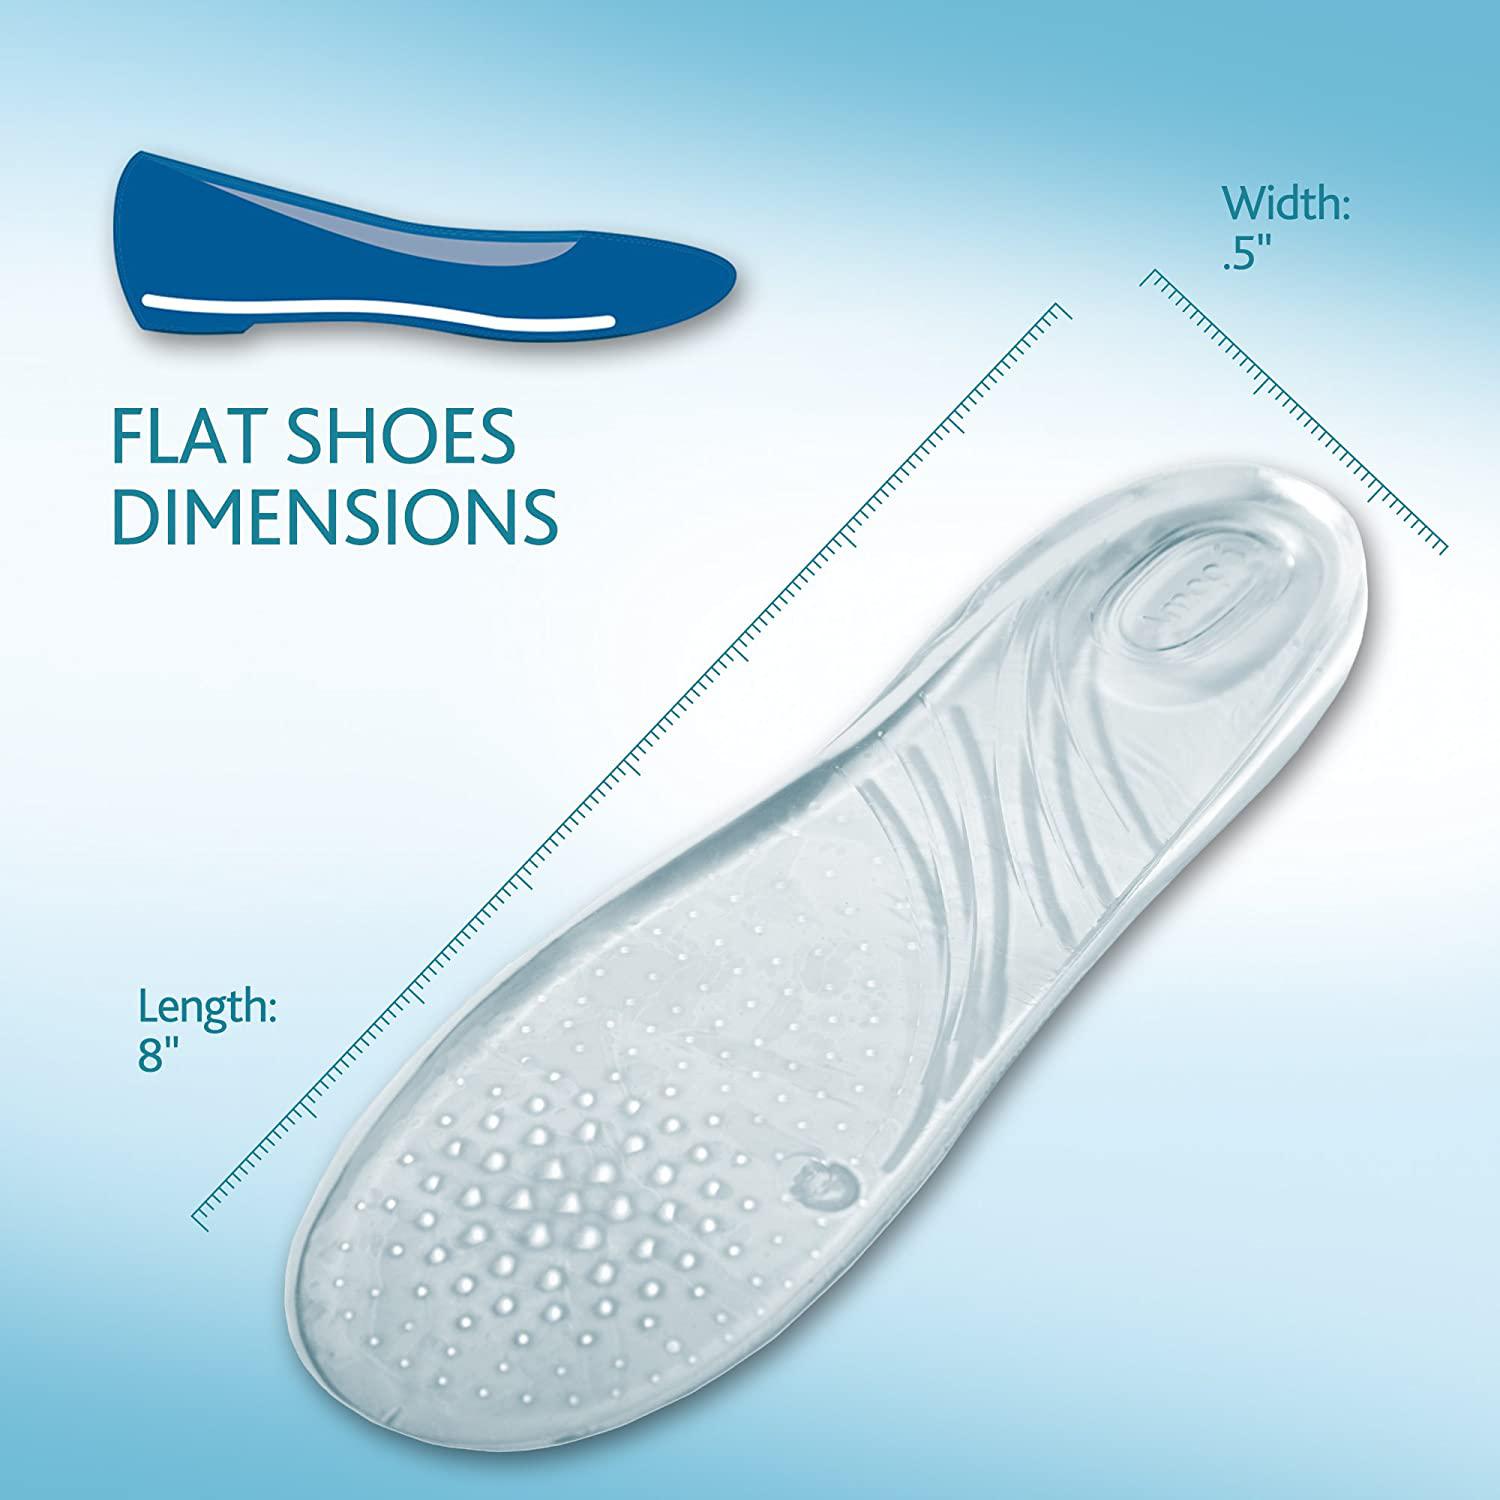 Women’s Amope Gel Insoles for Flats and Heels ($3.75 Sale Price!)